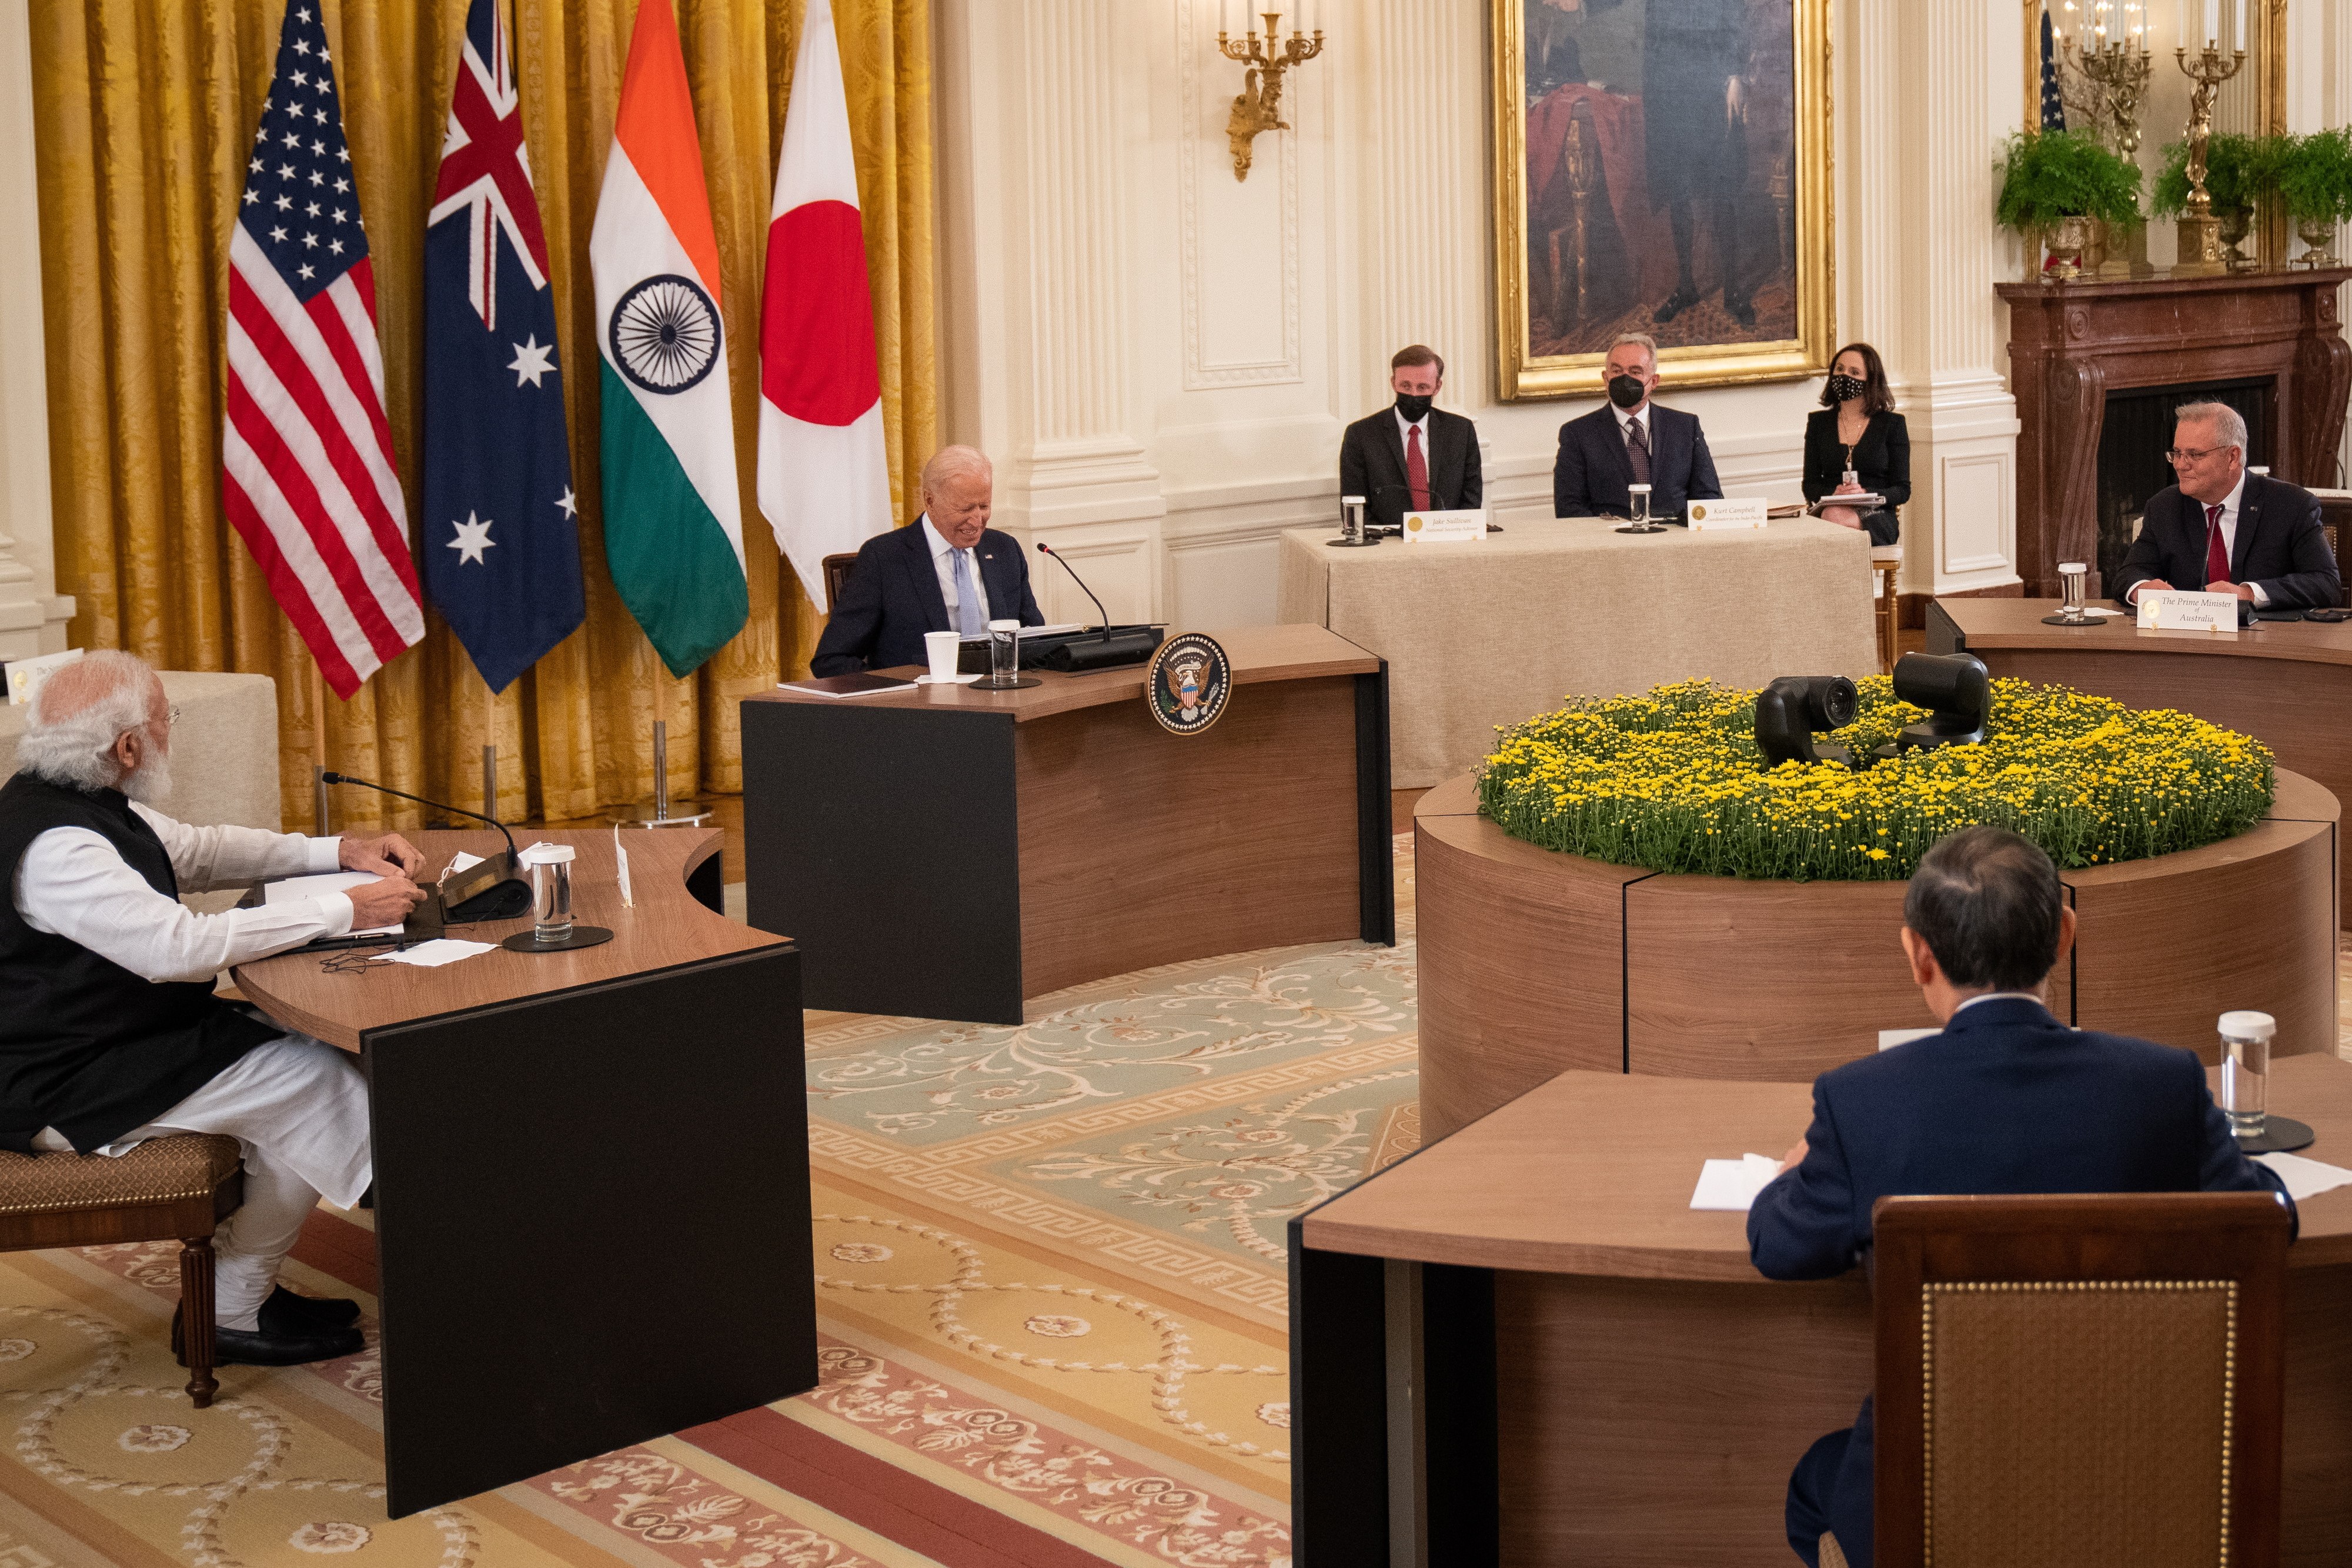 US President Joe Biden hosts a Quad leaders’ summit with (anticlockwise, from the left) Indian Prime Minister Narendra Modi, Japan’s Prime Minister Yoshihide Suga and Australian Prime Minister Scott Morrison, in the East Room at the White House in Washington on September 24. US-led initiatives may add fuel to China’s victim-playing. Photo: EPA-EFE